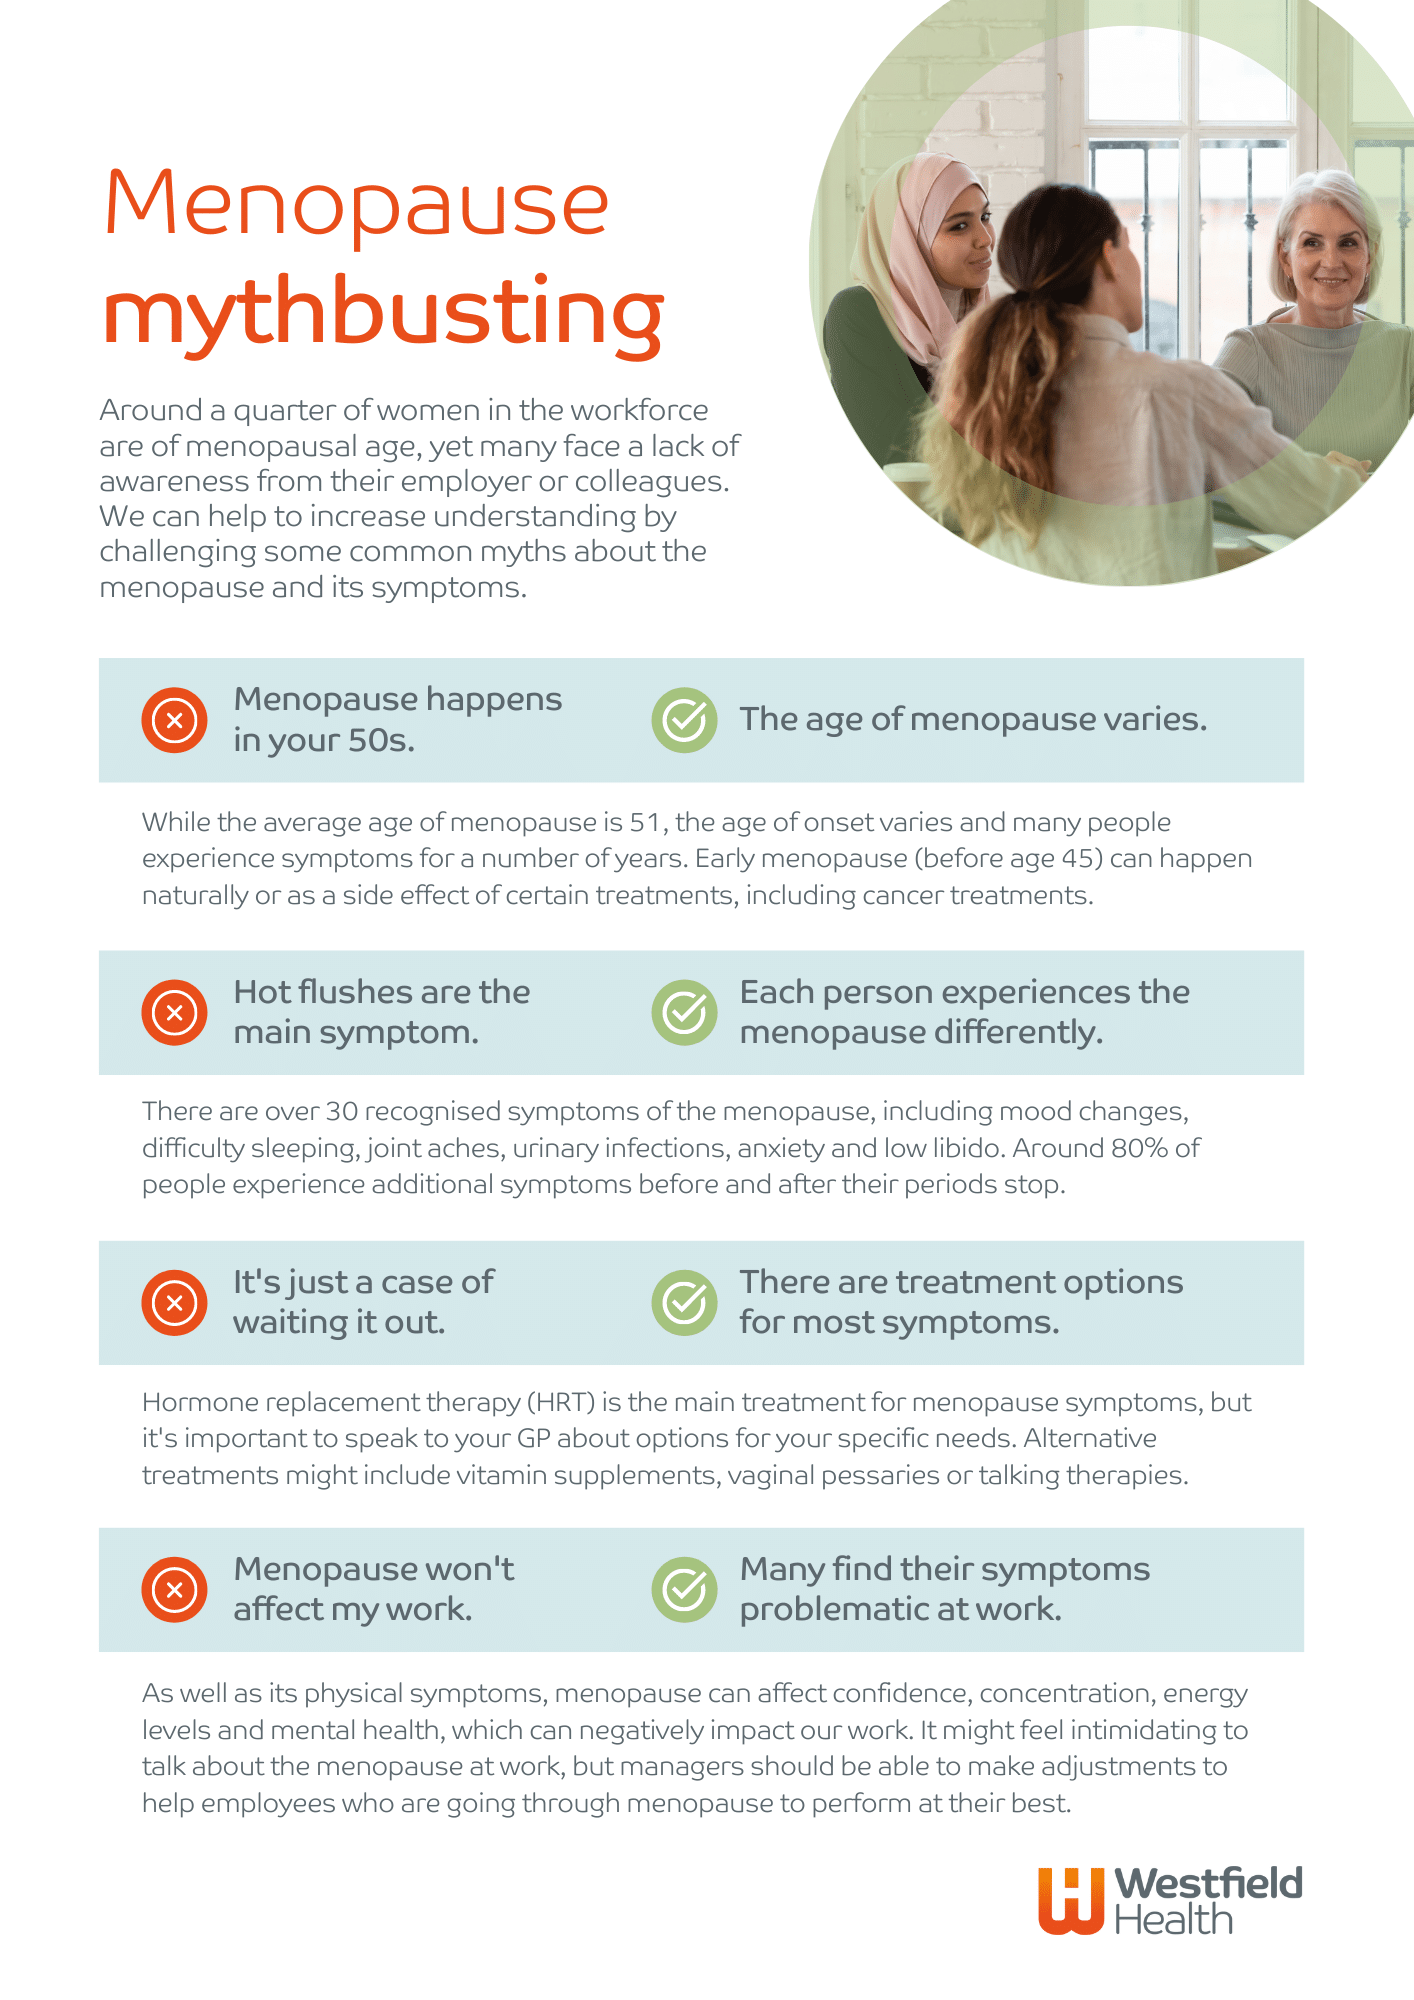 Menopause mythbusting poster for employees